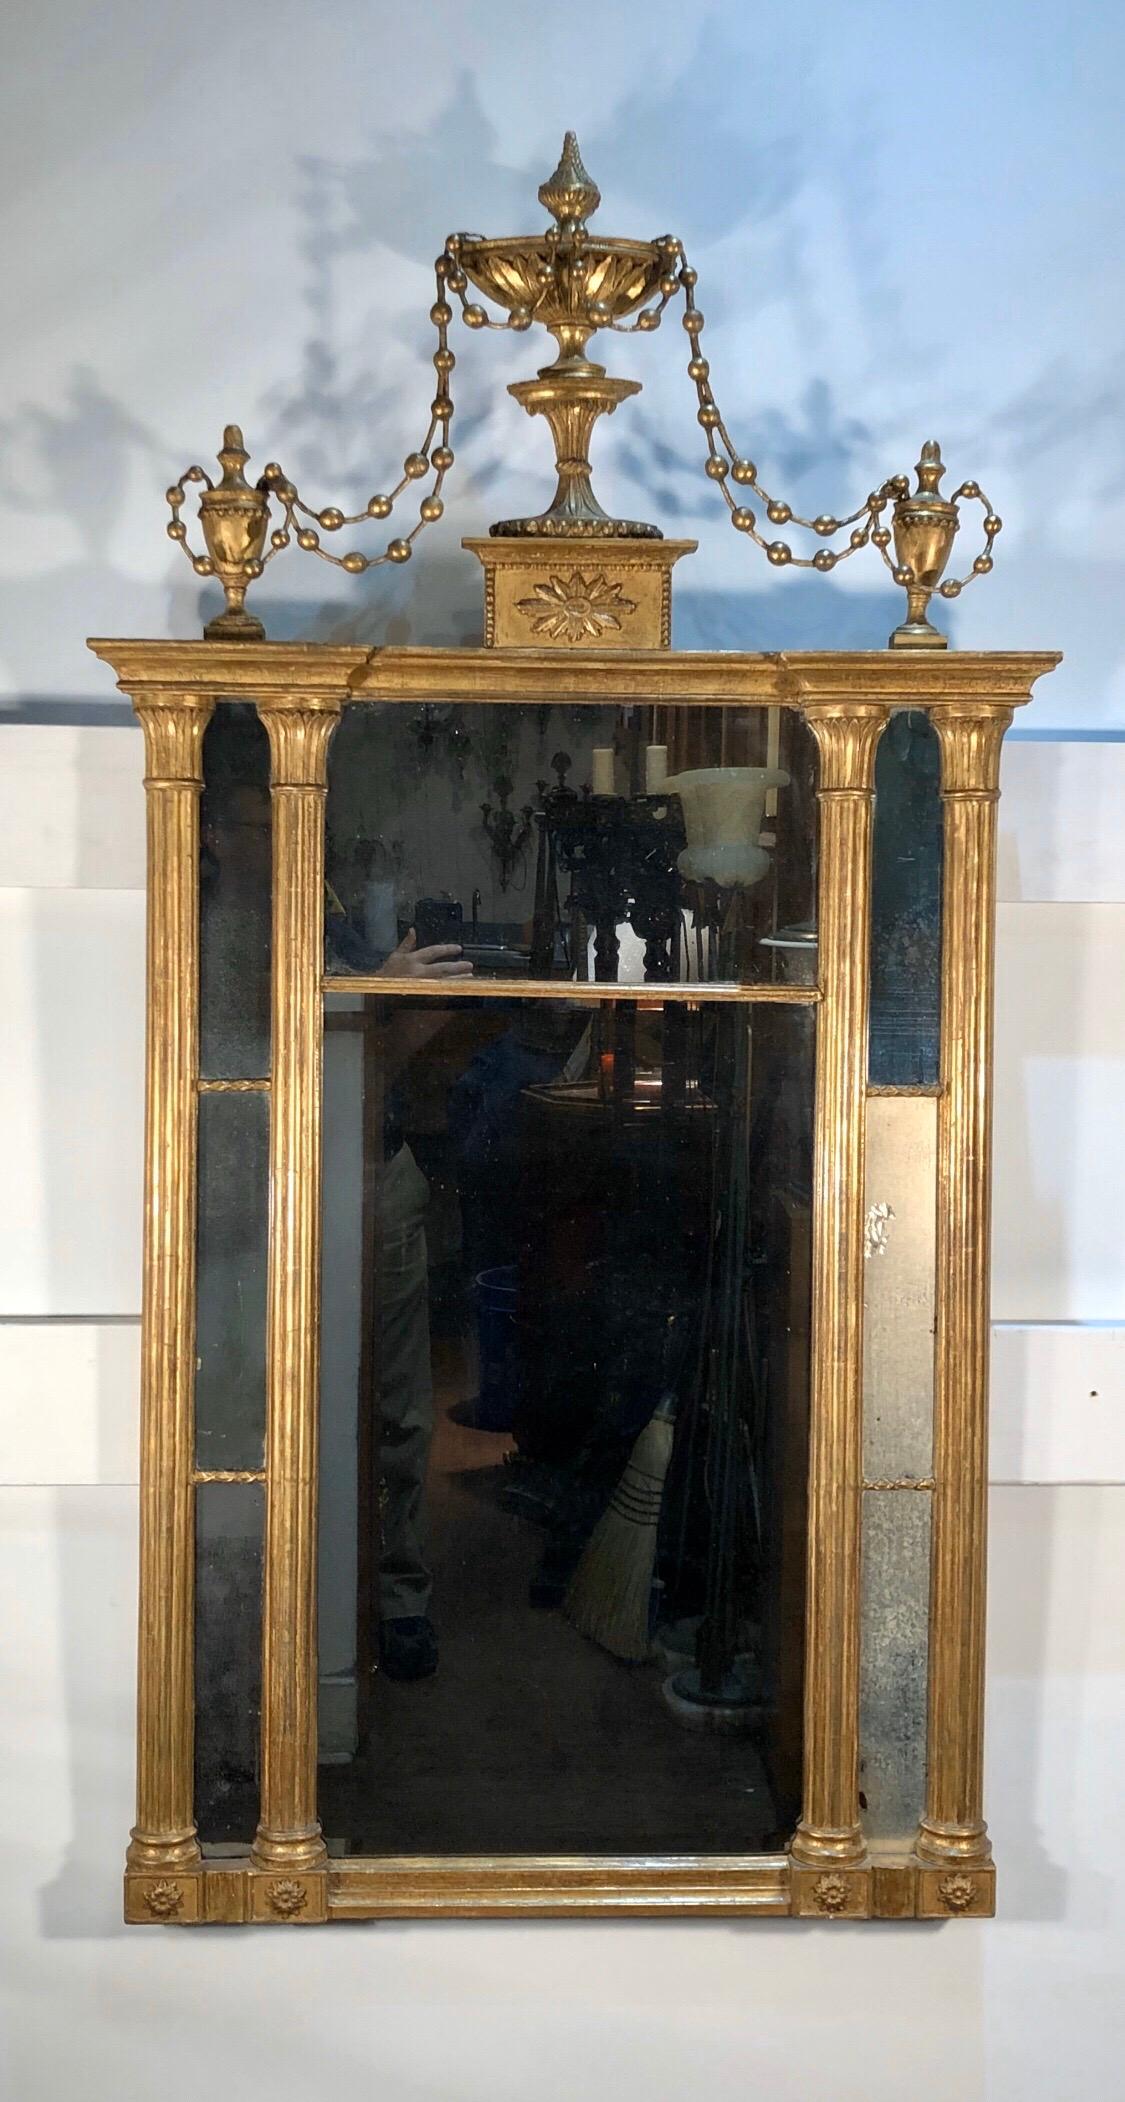 This Classic Greek and Egyptian motif mirror has vertical pillars flanking mirror panels framing the central split looking glass. The cornice of the mirror has a Classic Adams Urn on plinth with a rosette flanked by matching Adams Urns draped in